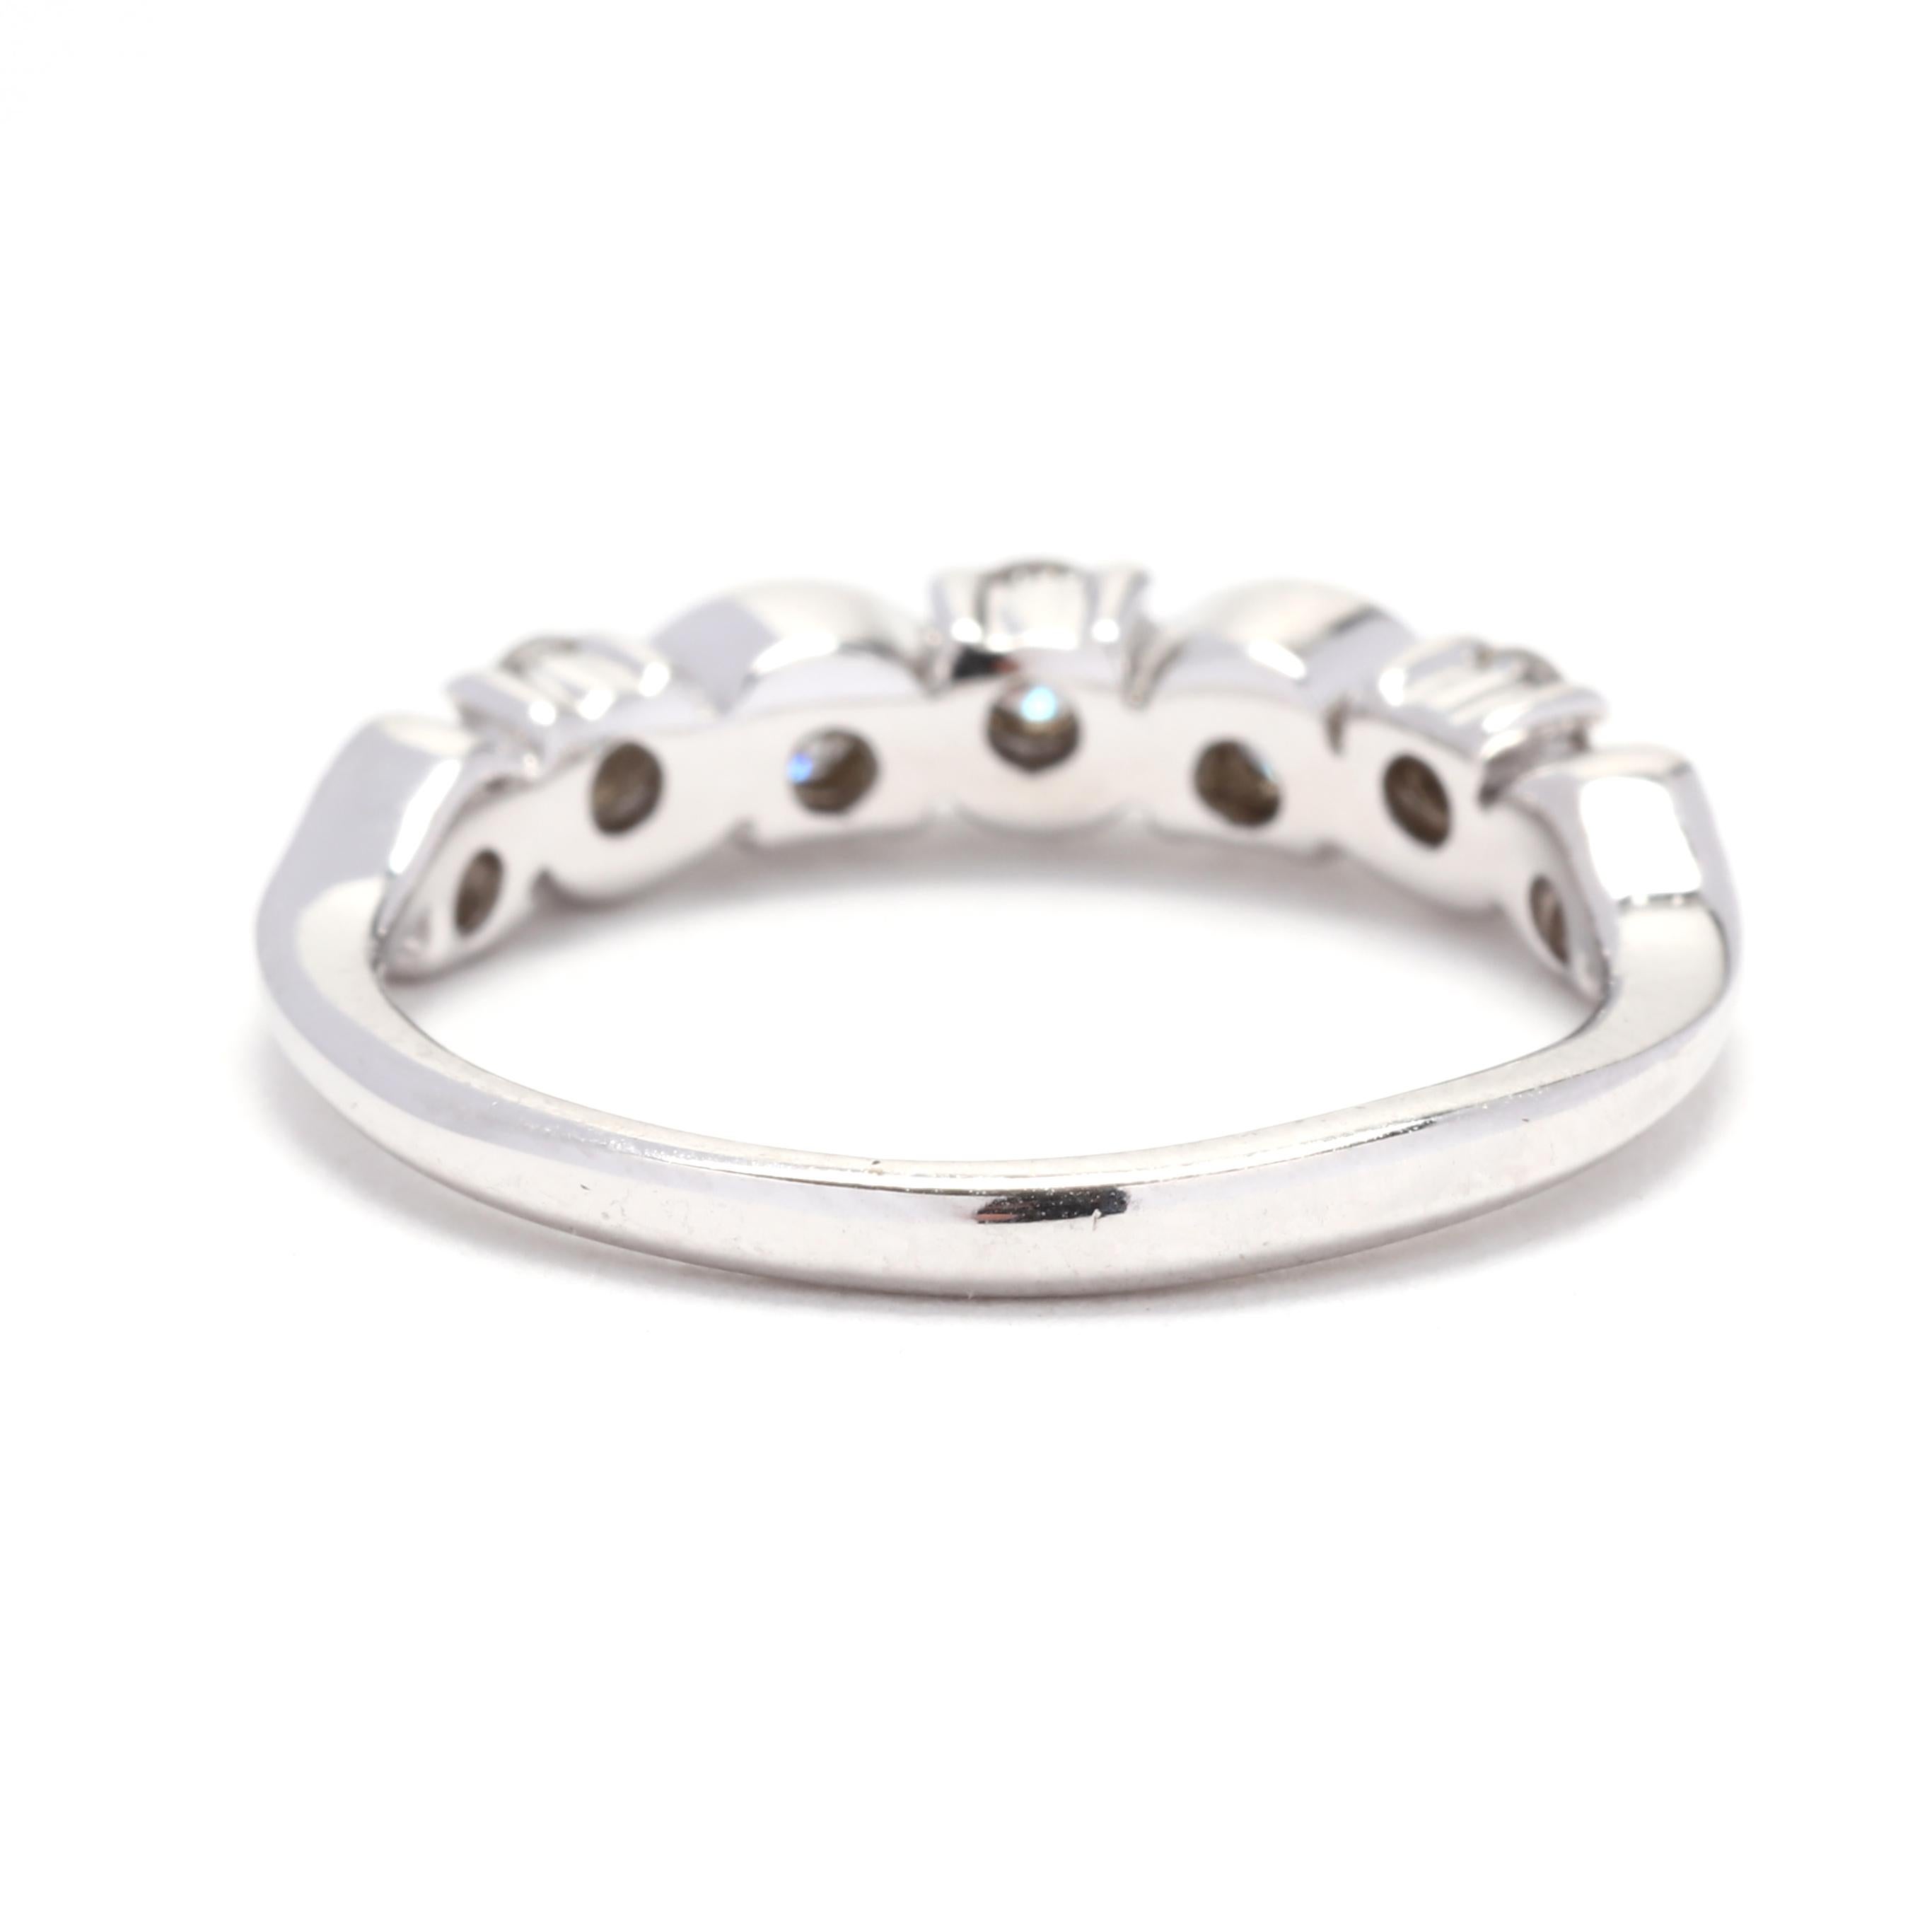 Brilliant Cut 0.45ctw Diamond Swirl Wedding Band, 14K White Gold, Ring Size 4.5, Stackable